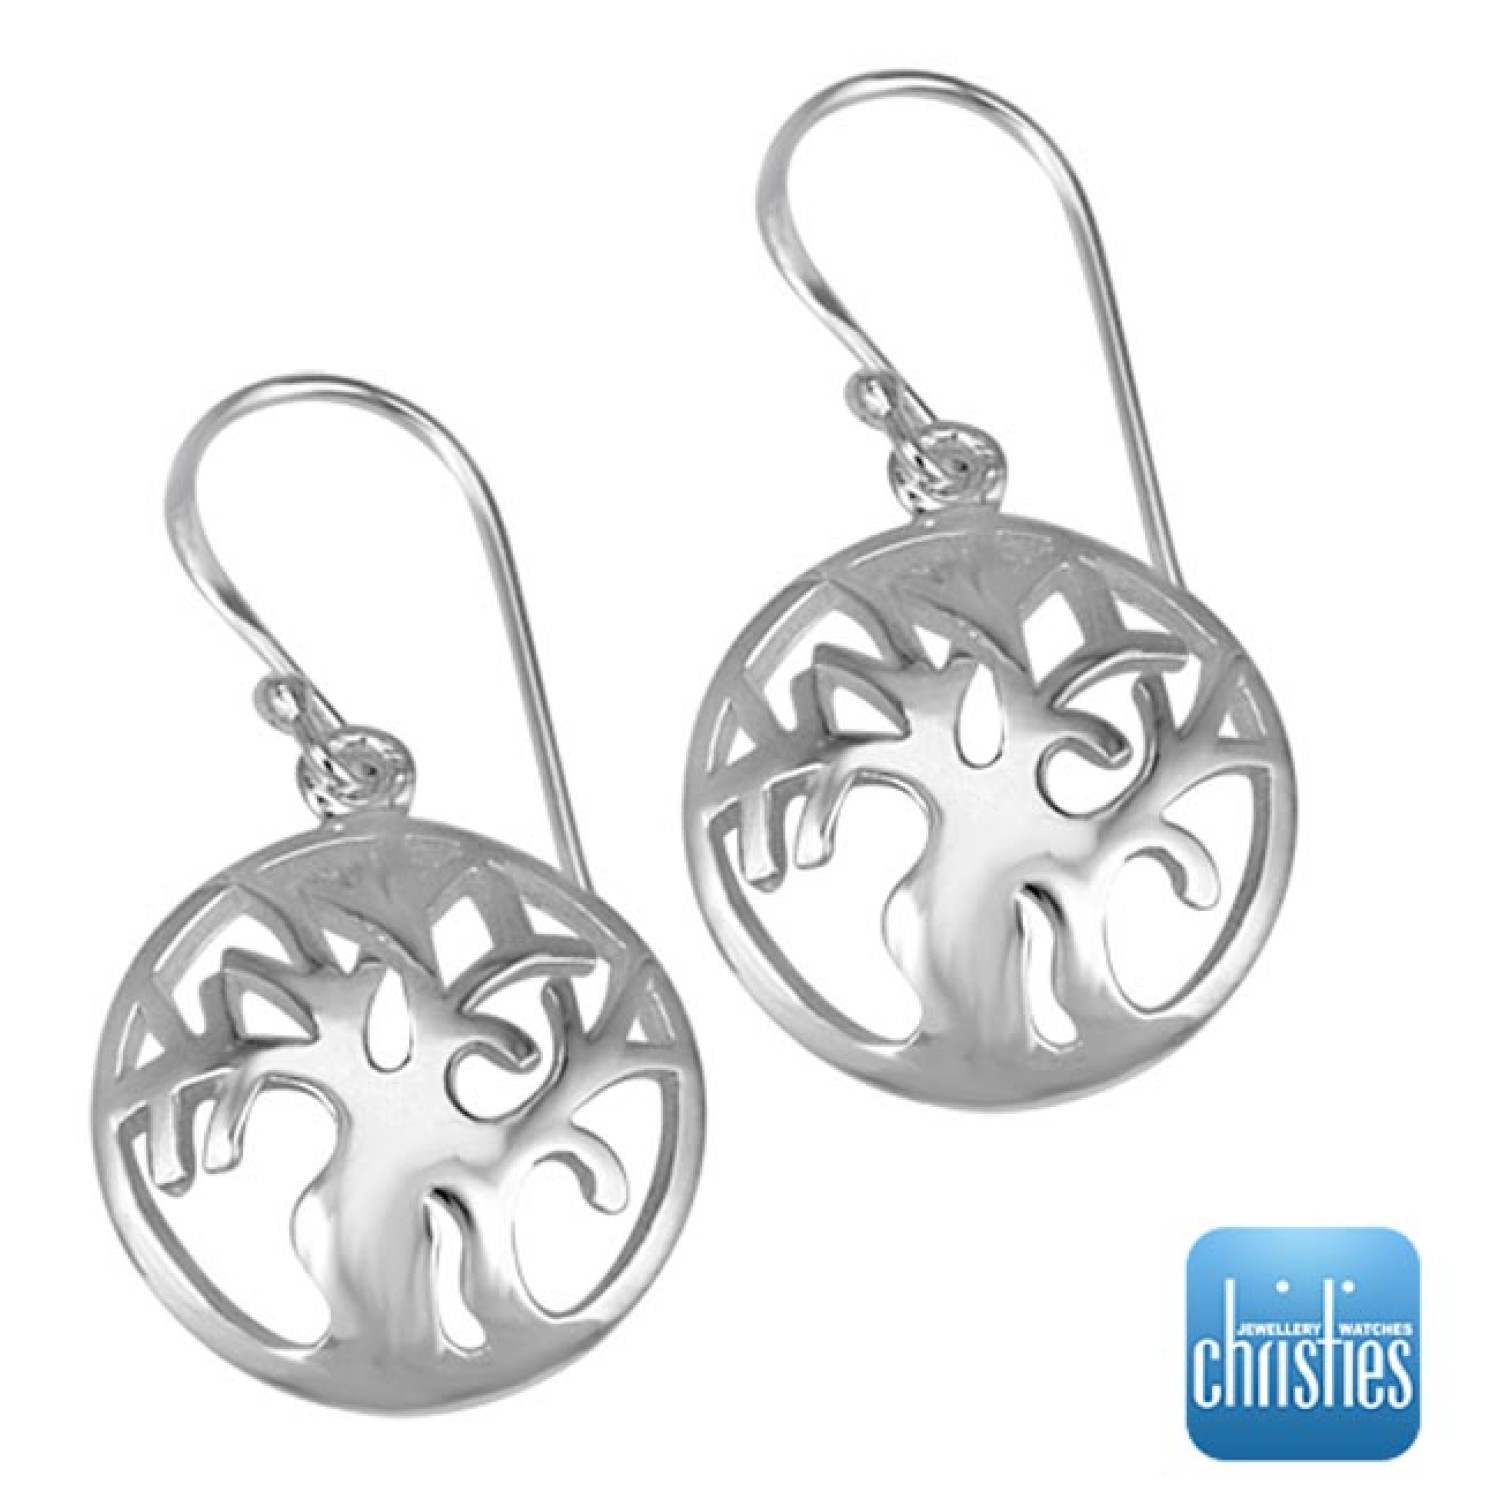 Sterling Silver Tree of Life Hook Earrings. Sterling Silver Tree of Life Hook Earrings The Tree of Life is a symbolic tree that is believed to connect all life forms. In a sense, the whole earth is a tree with all types of animals, plants, humans and othe